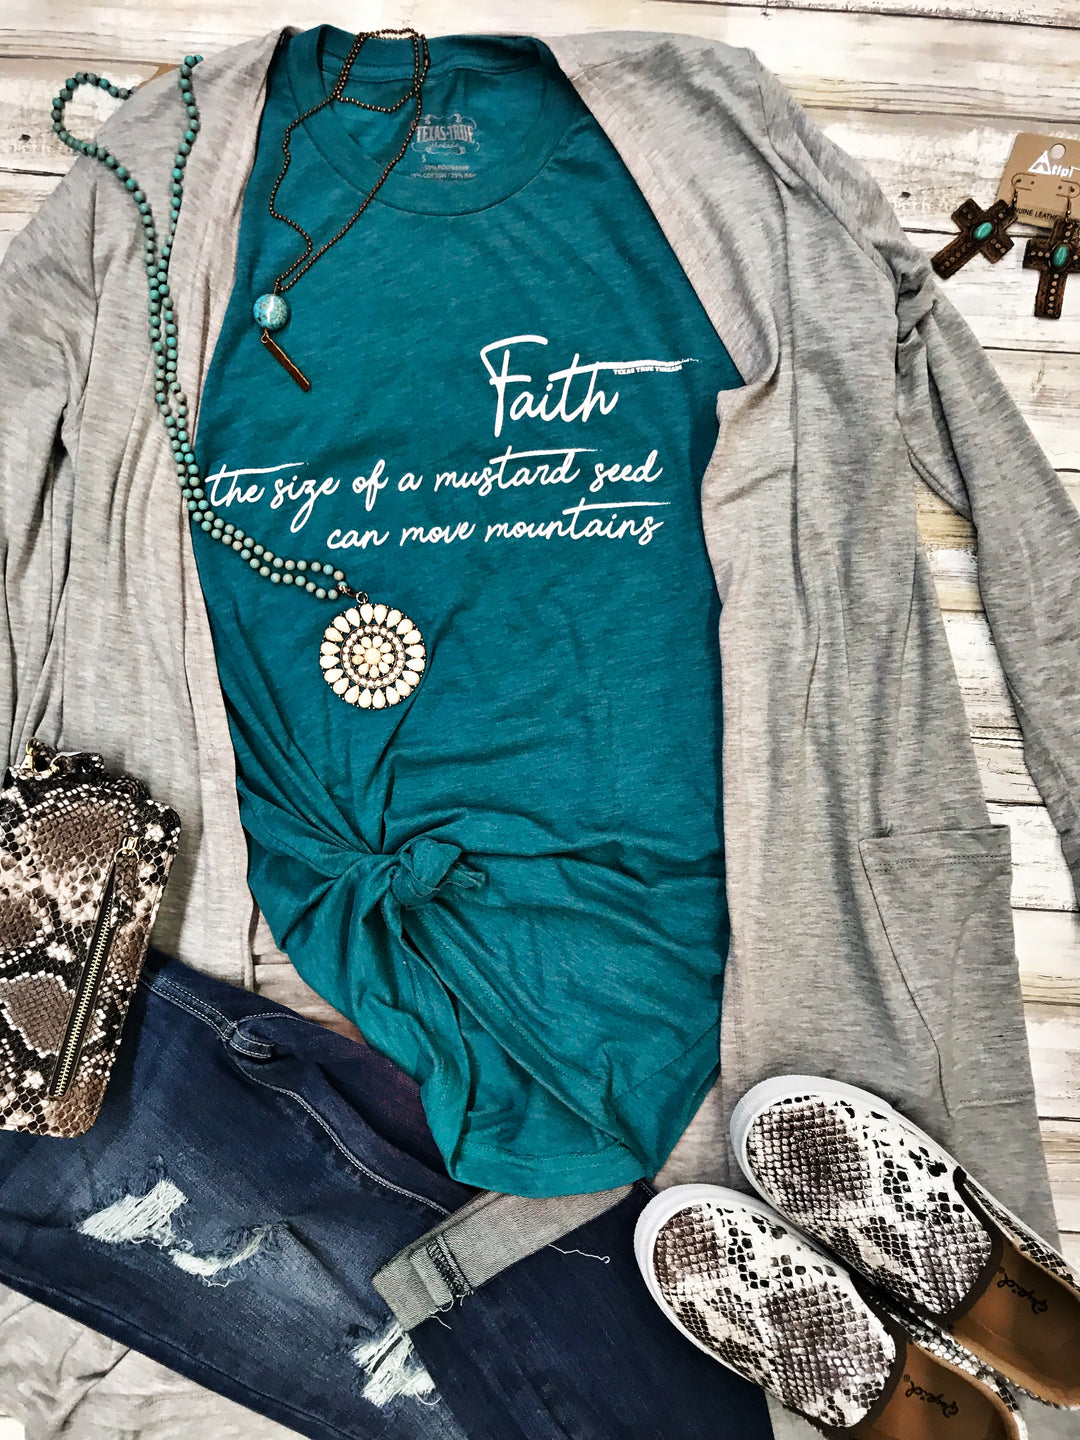 Faith the Size of a Mustard Seed by Texas True Threads Graphic Tees  Texas True Threads - Horse Creek Boutique